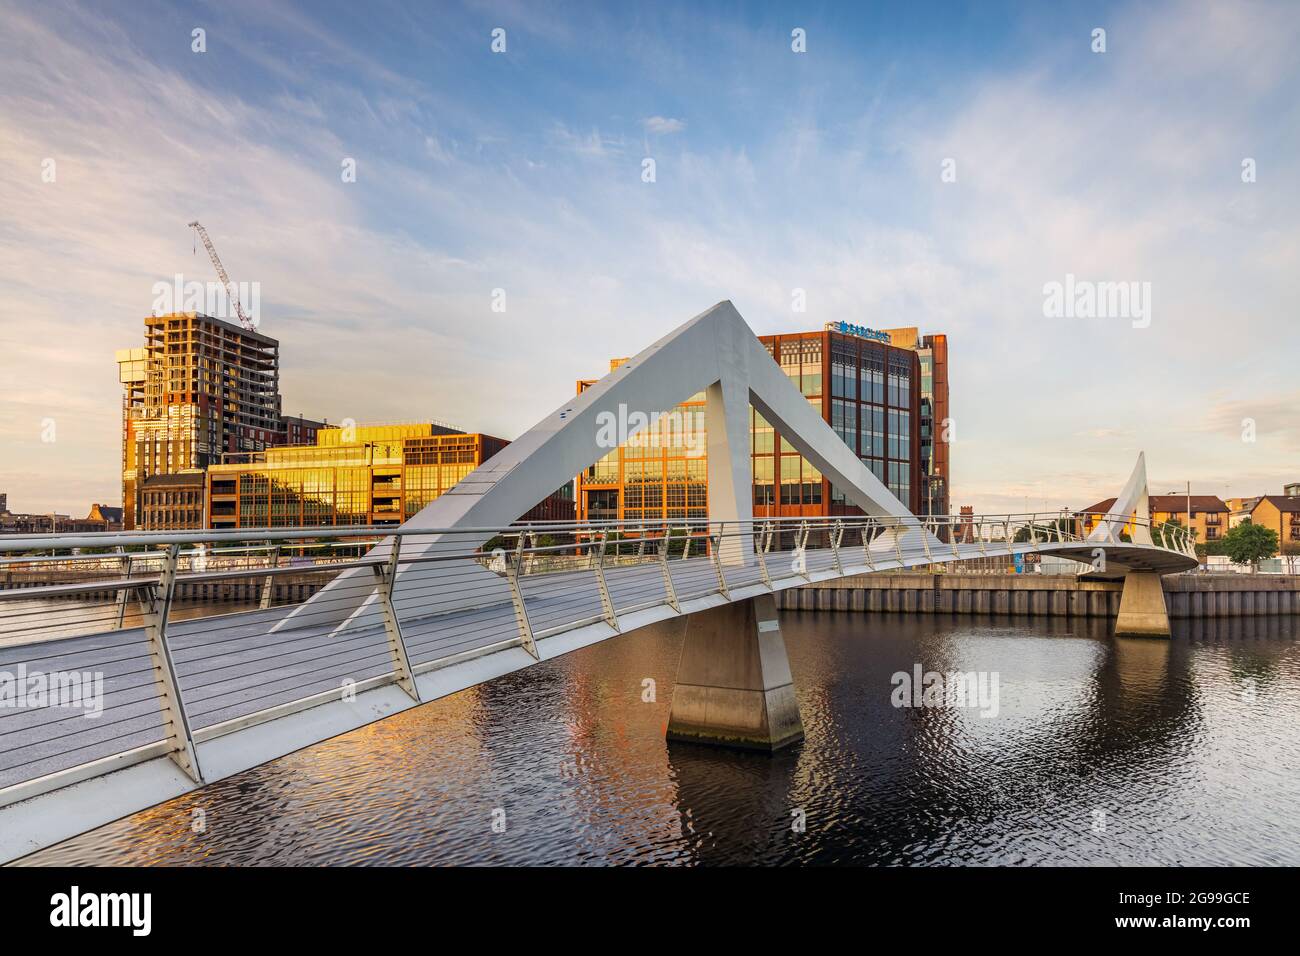 The Squiggly Bridge over the River Clyde in Glasgow, taken at sunrise. Stock Photo